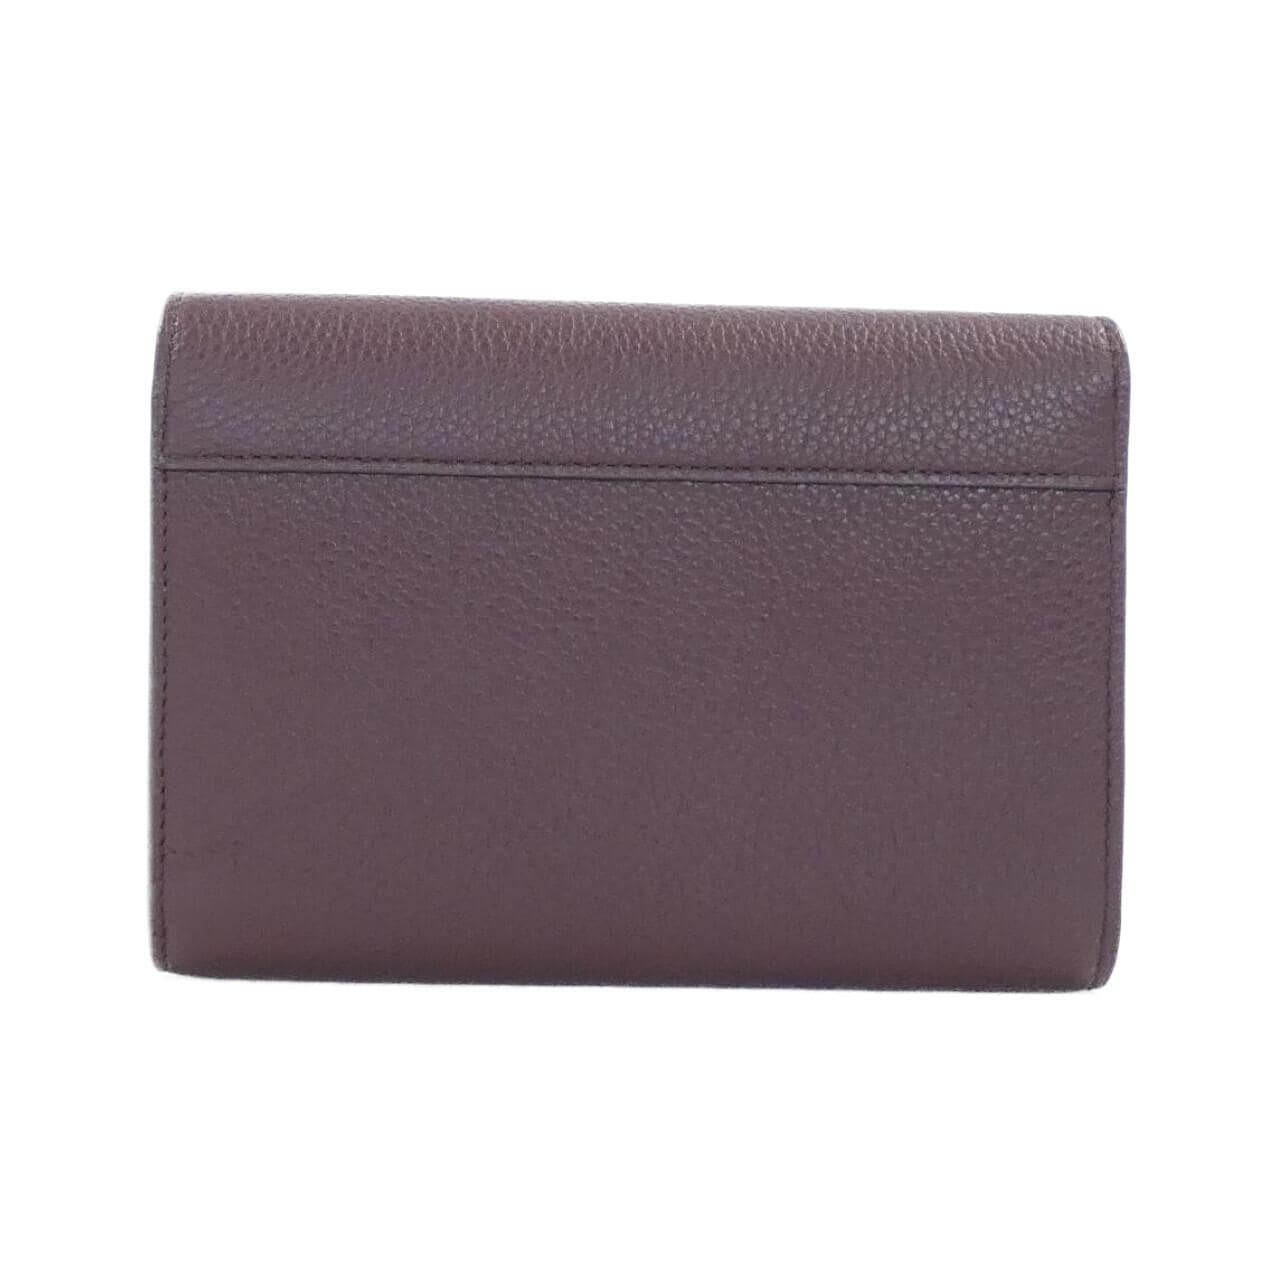 [BRAND NEW] Mulberry Harlow RL5656 013 Wallet